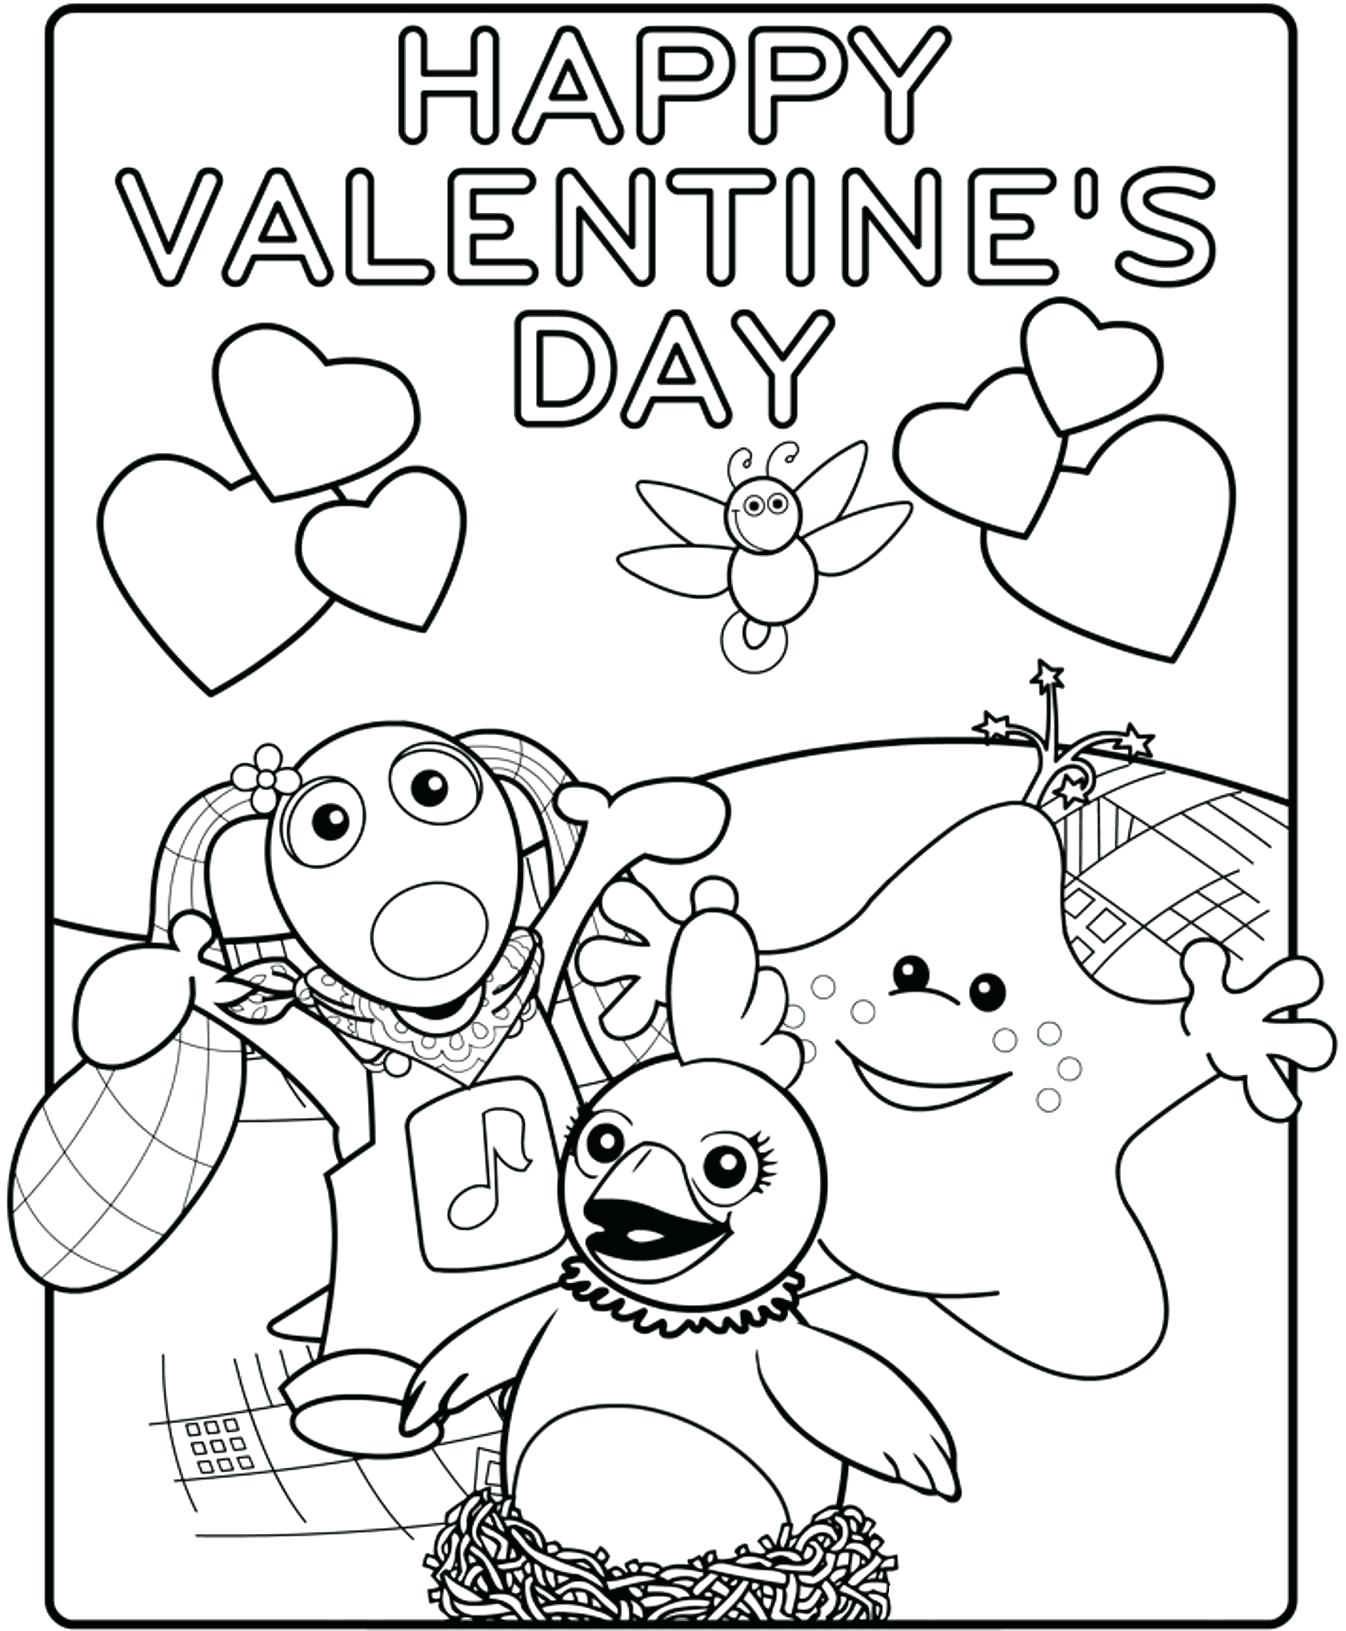 Spongebob Valentines Day Coloring Pages At GetColorings Free Printable Colorings Pages To